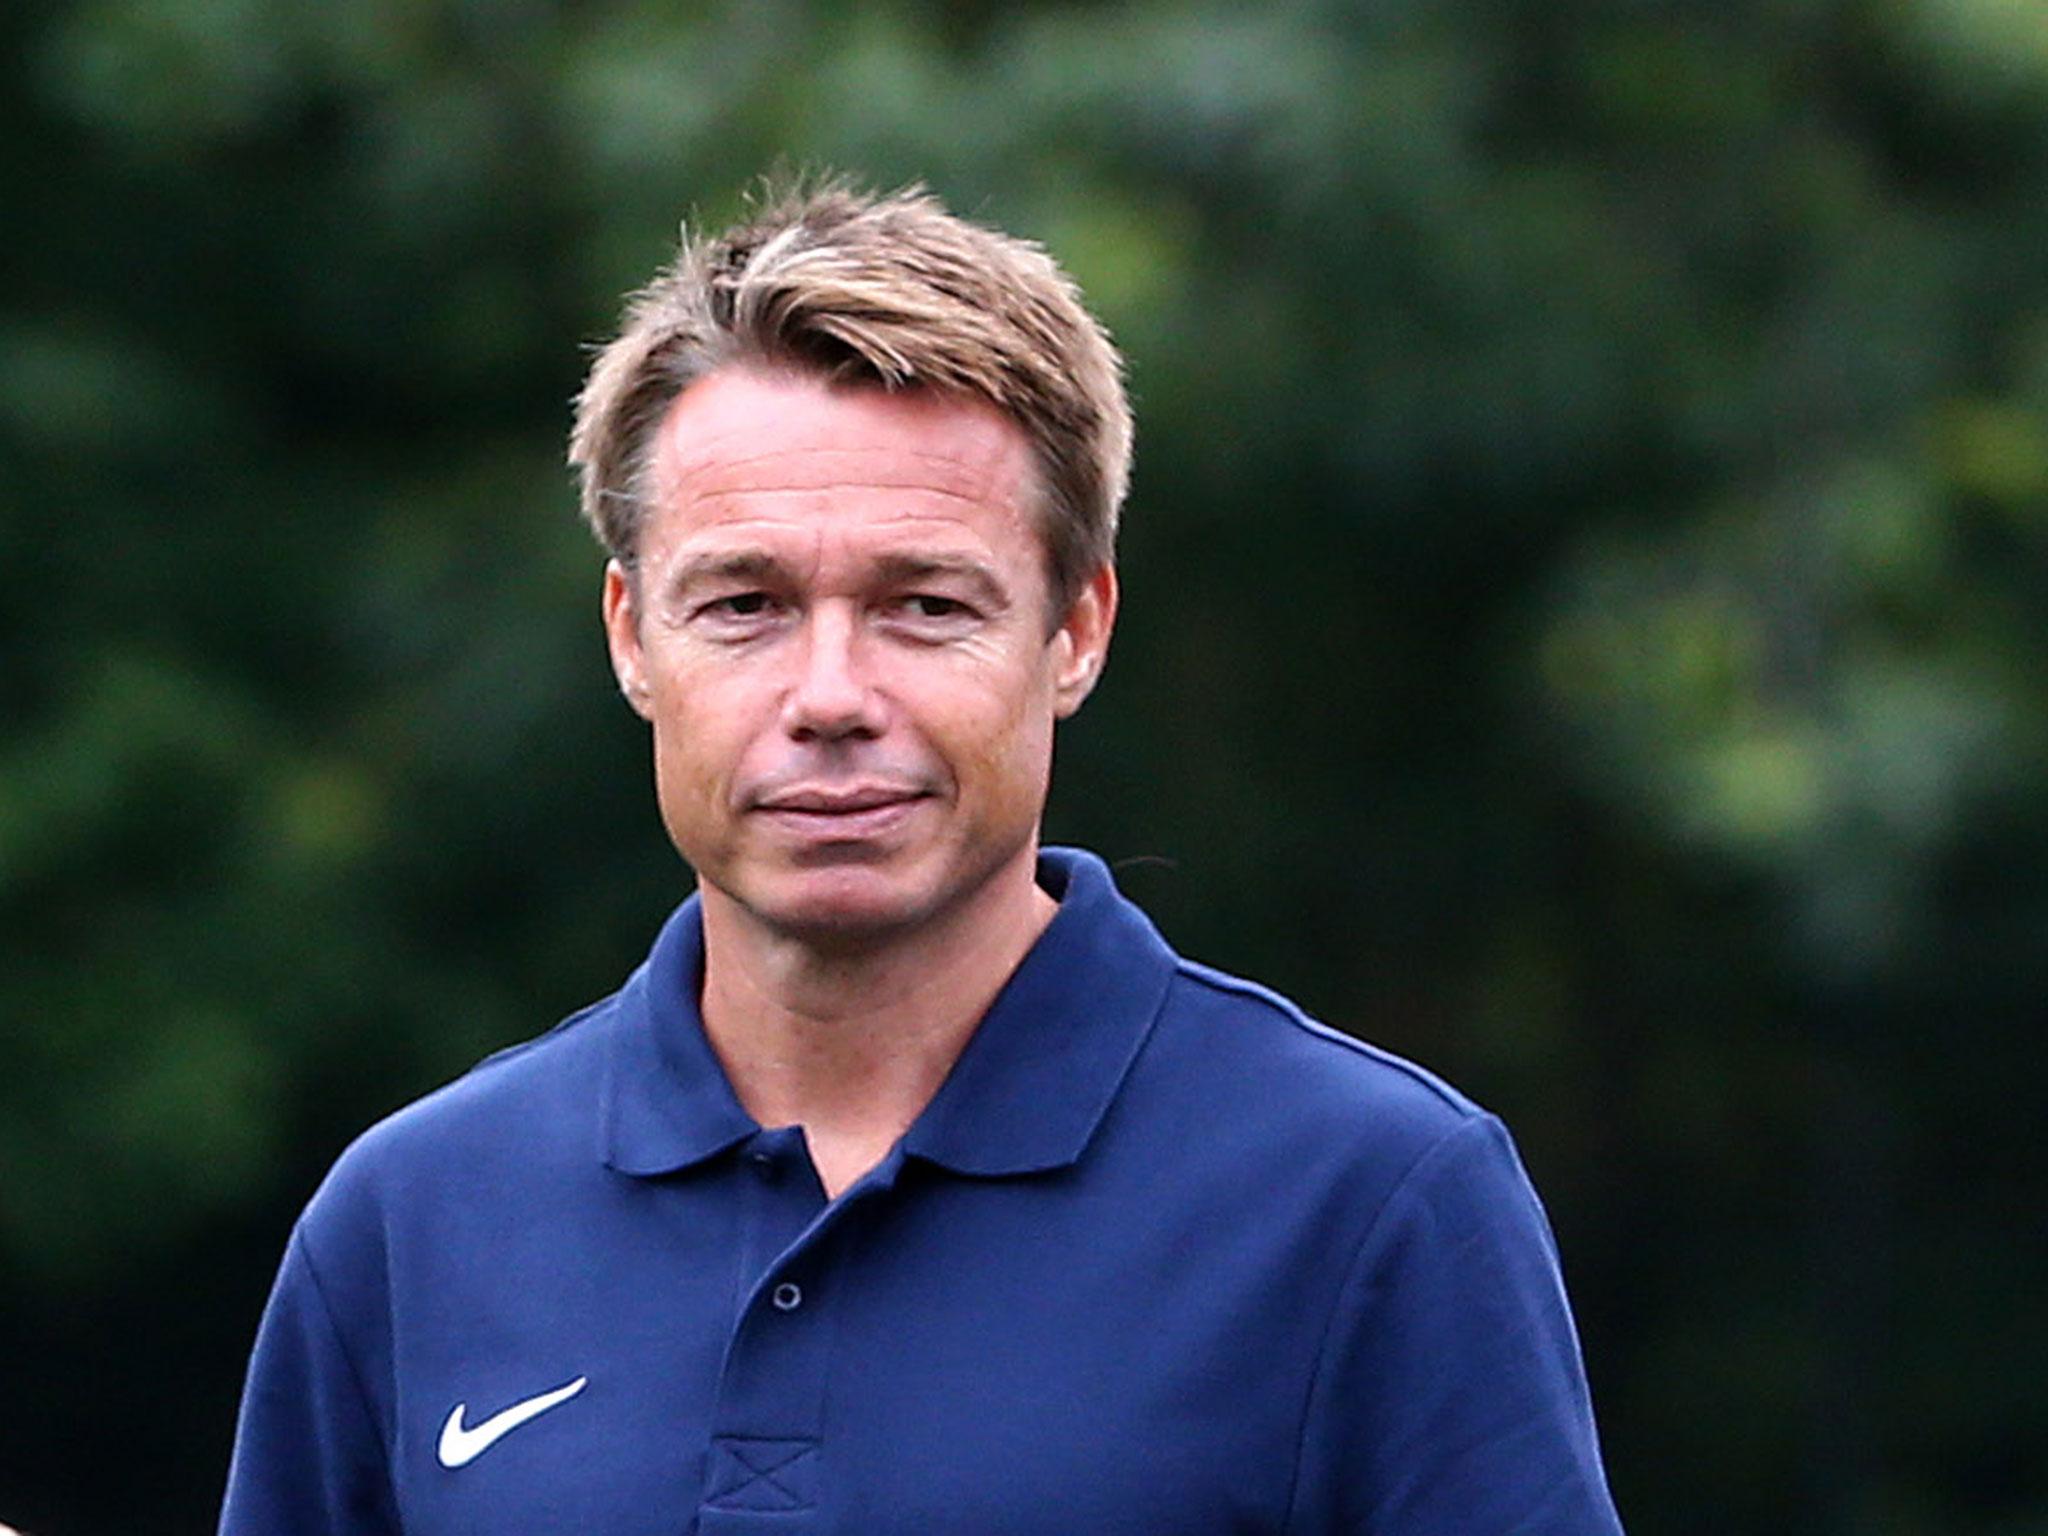 It's believed the FA have reached out to Le Saux for his insight as a former player